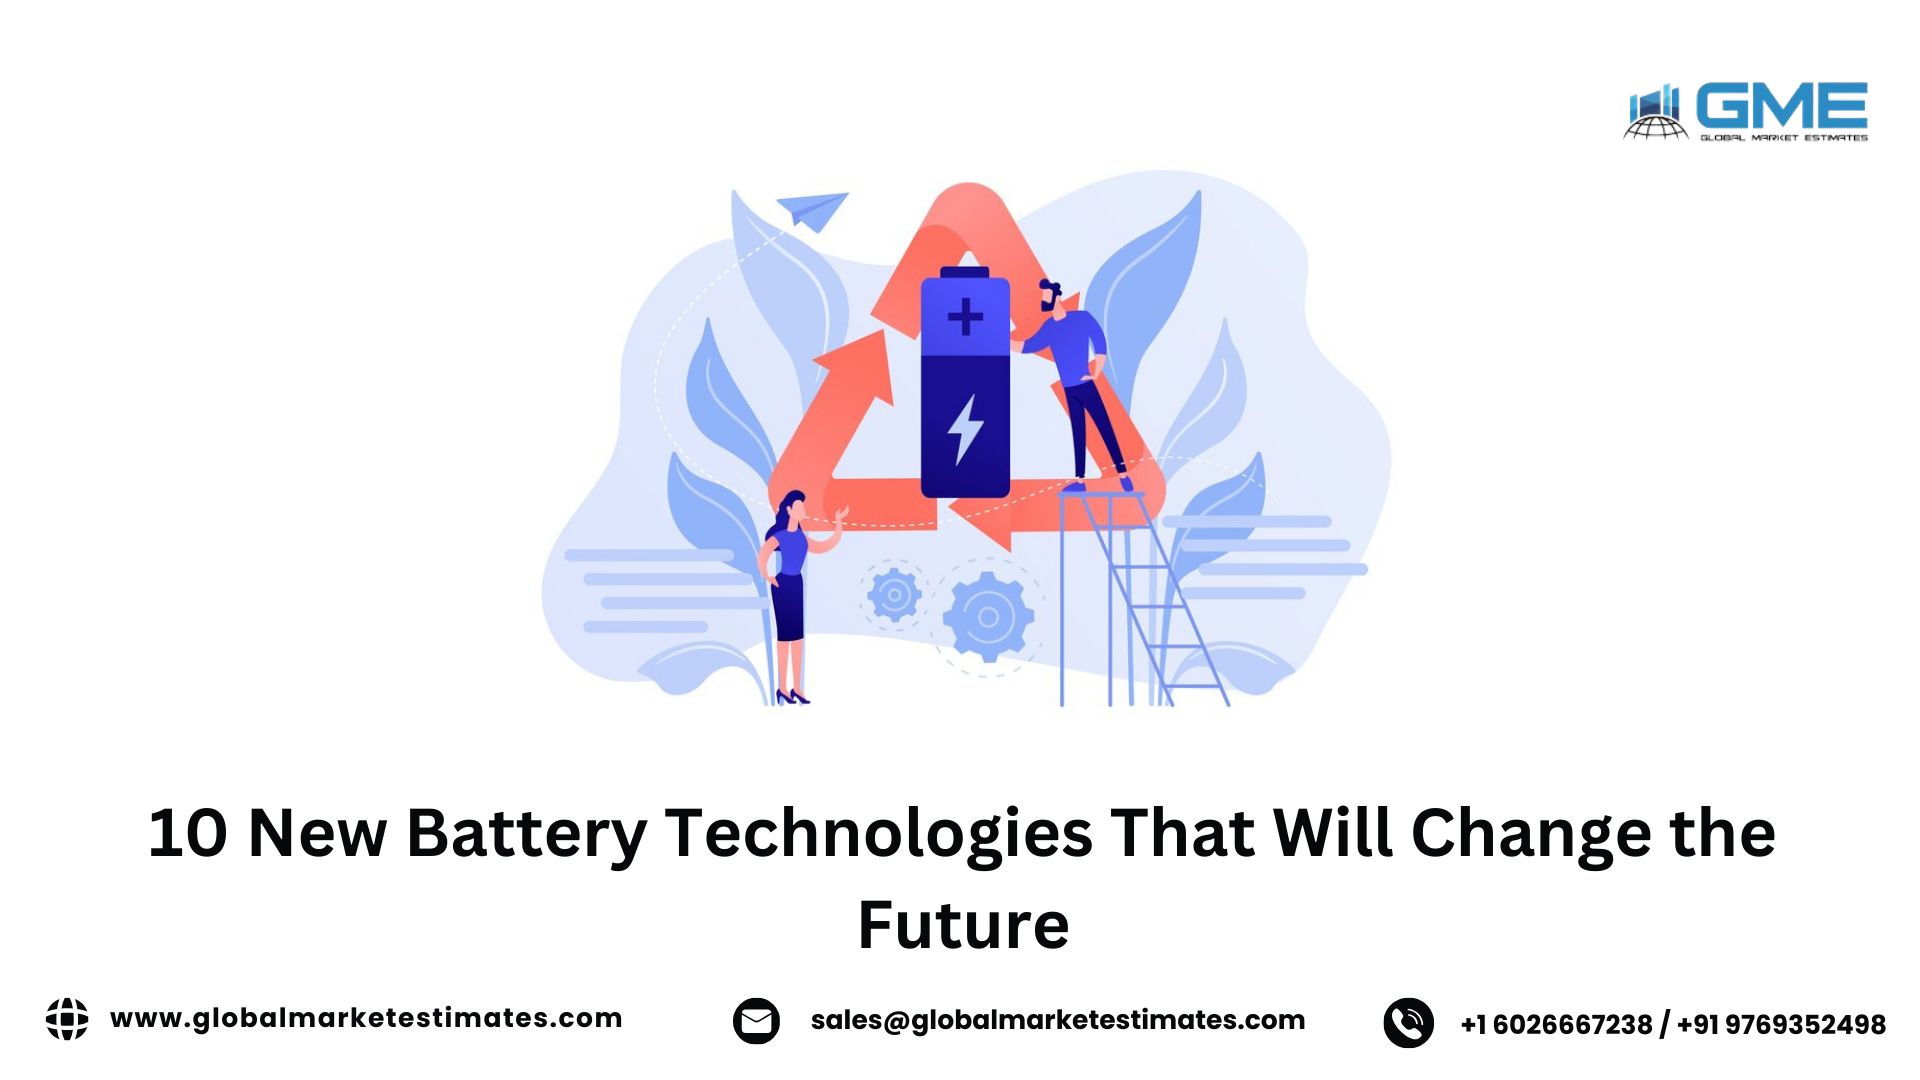 10 new battery technologies that will change the future